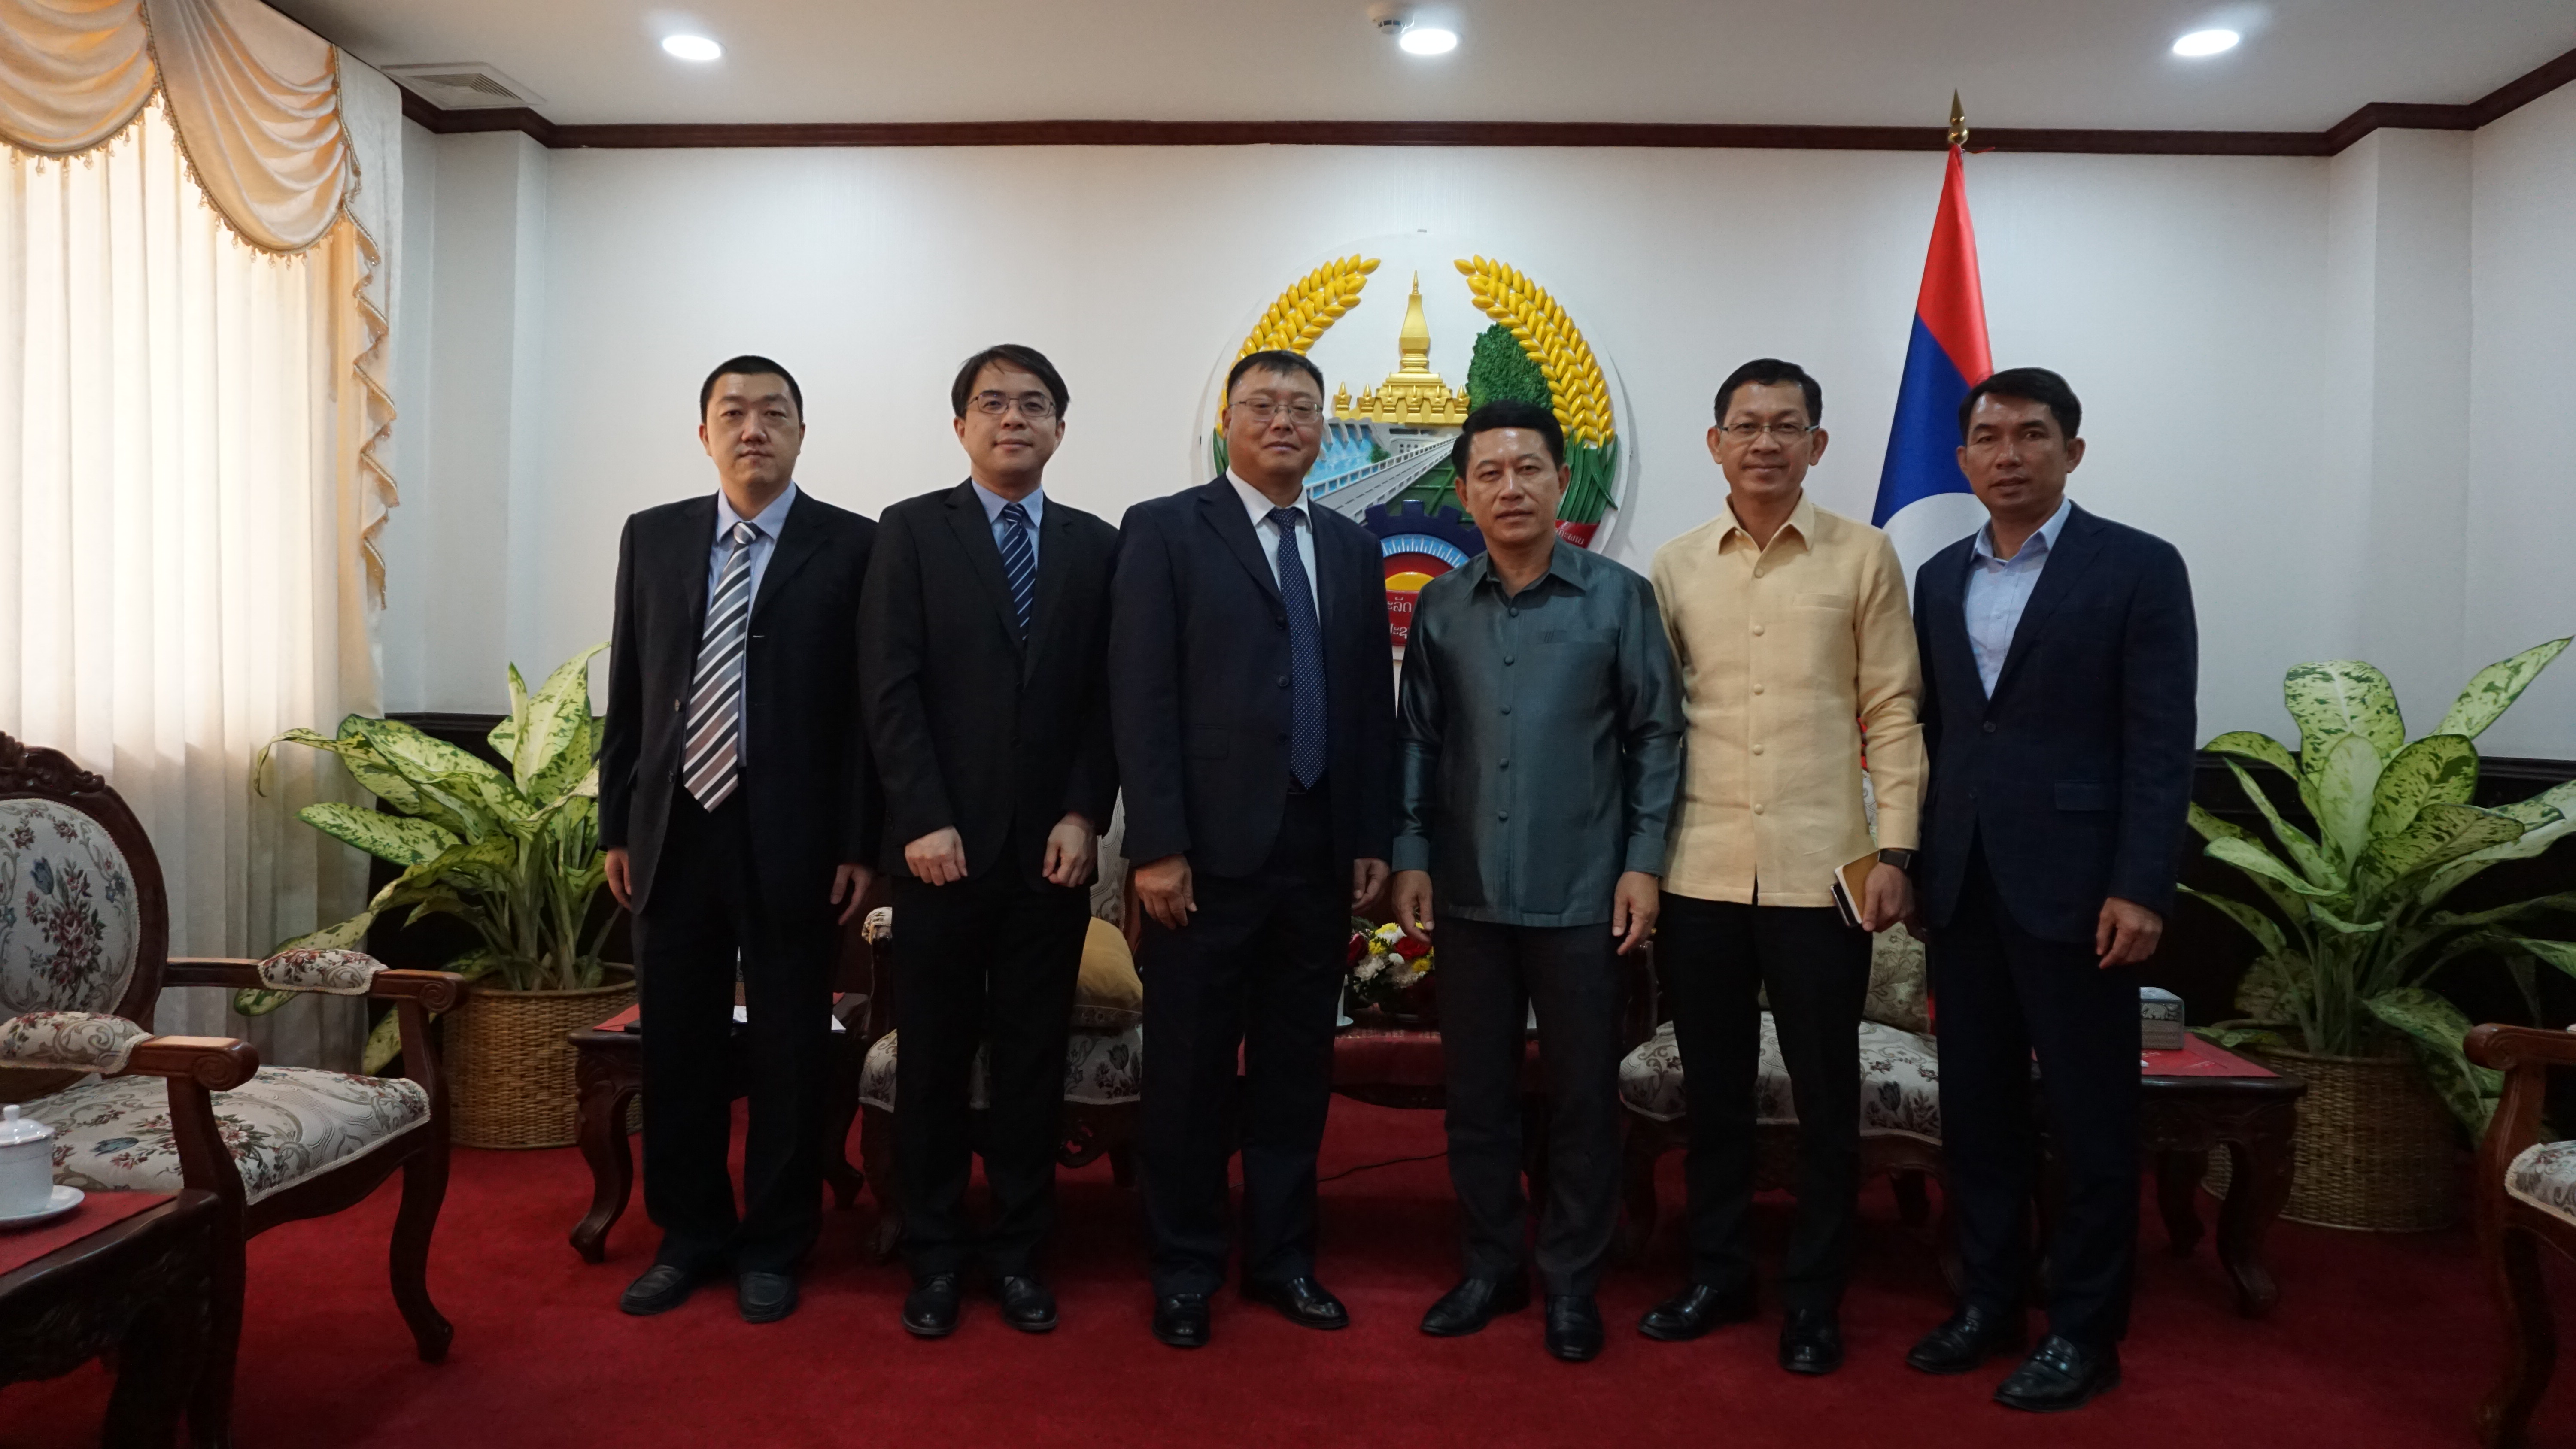 Deputy Prime Minister and Minister of Foreign Affairs of Laos Saleumxay Kommasith spoke highly of the association of Chinese-funded power generation enterprises in Laos